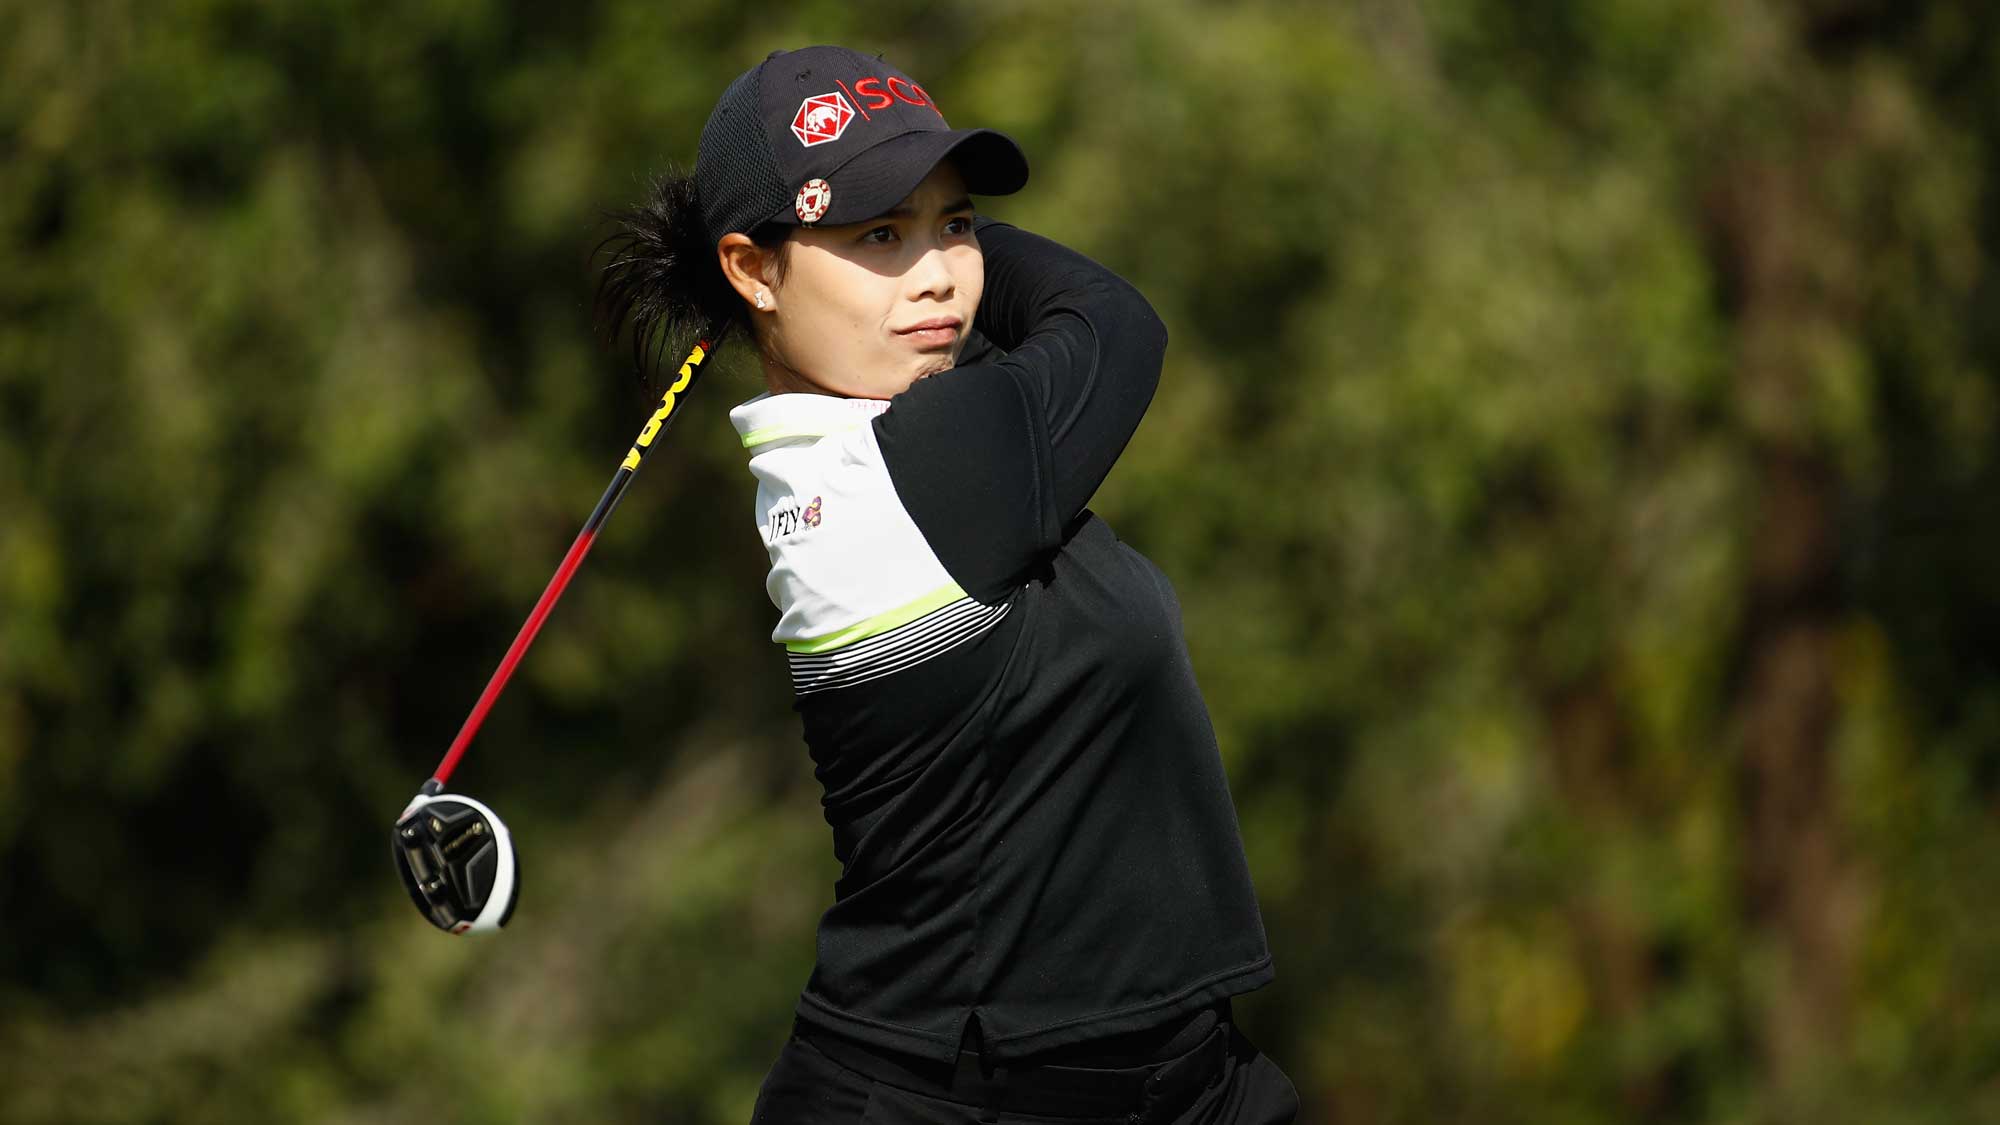 Moriya Jutanugarn of Thailand hits her tee shot on the 4th hole during the final round of the Indy Women In Tech Championship-Presented By Guggenheim